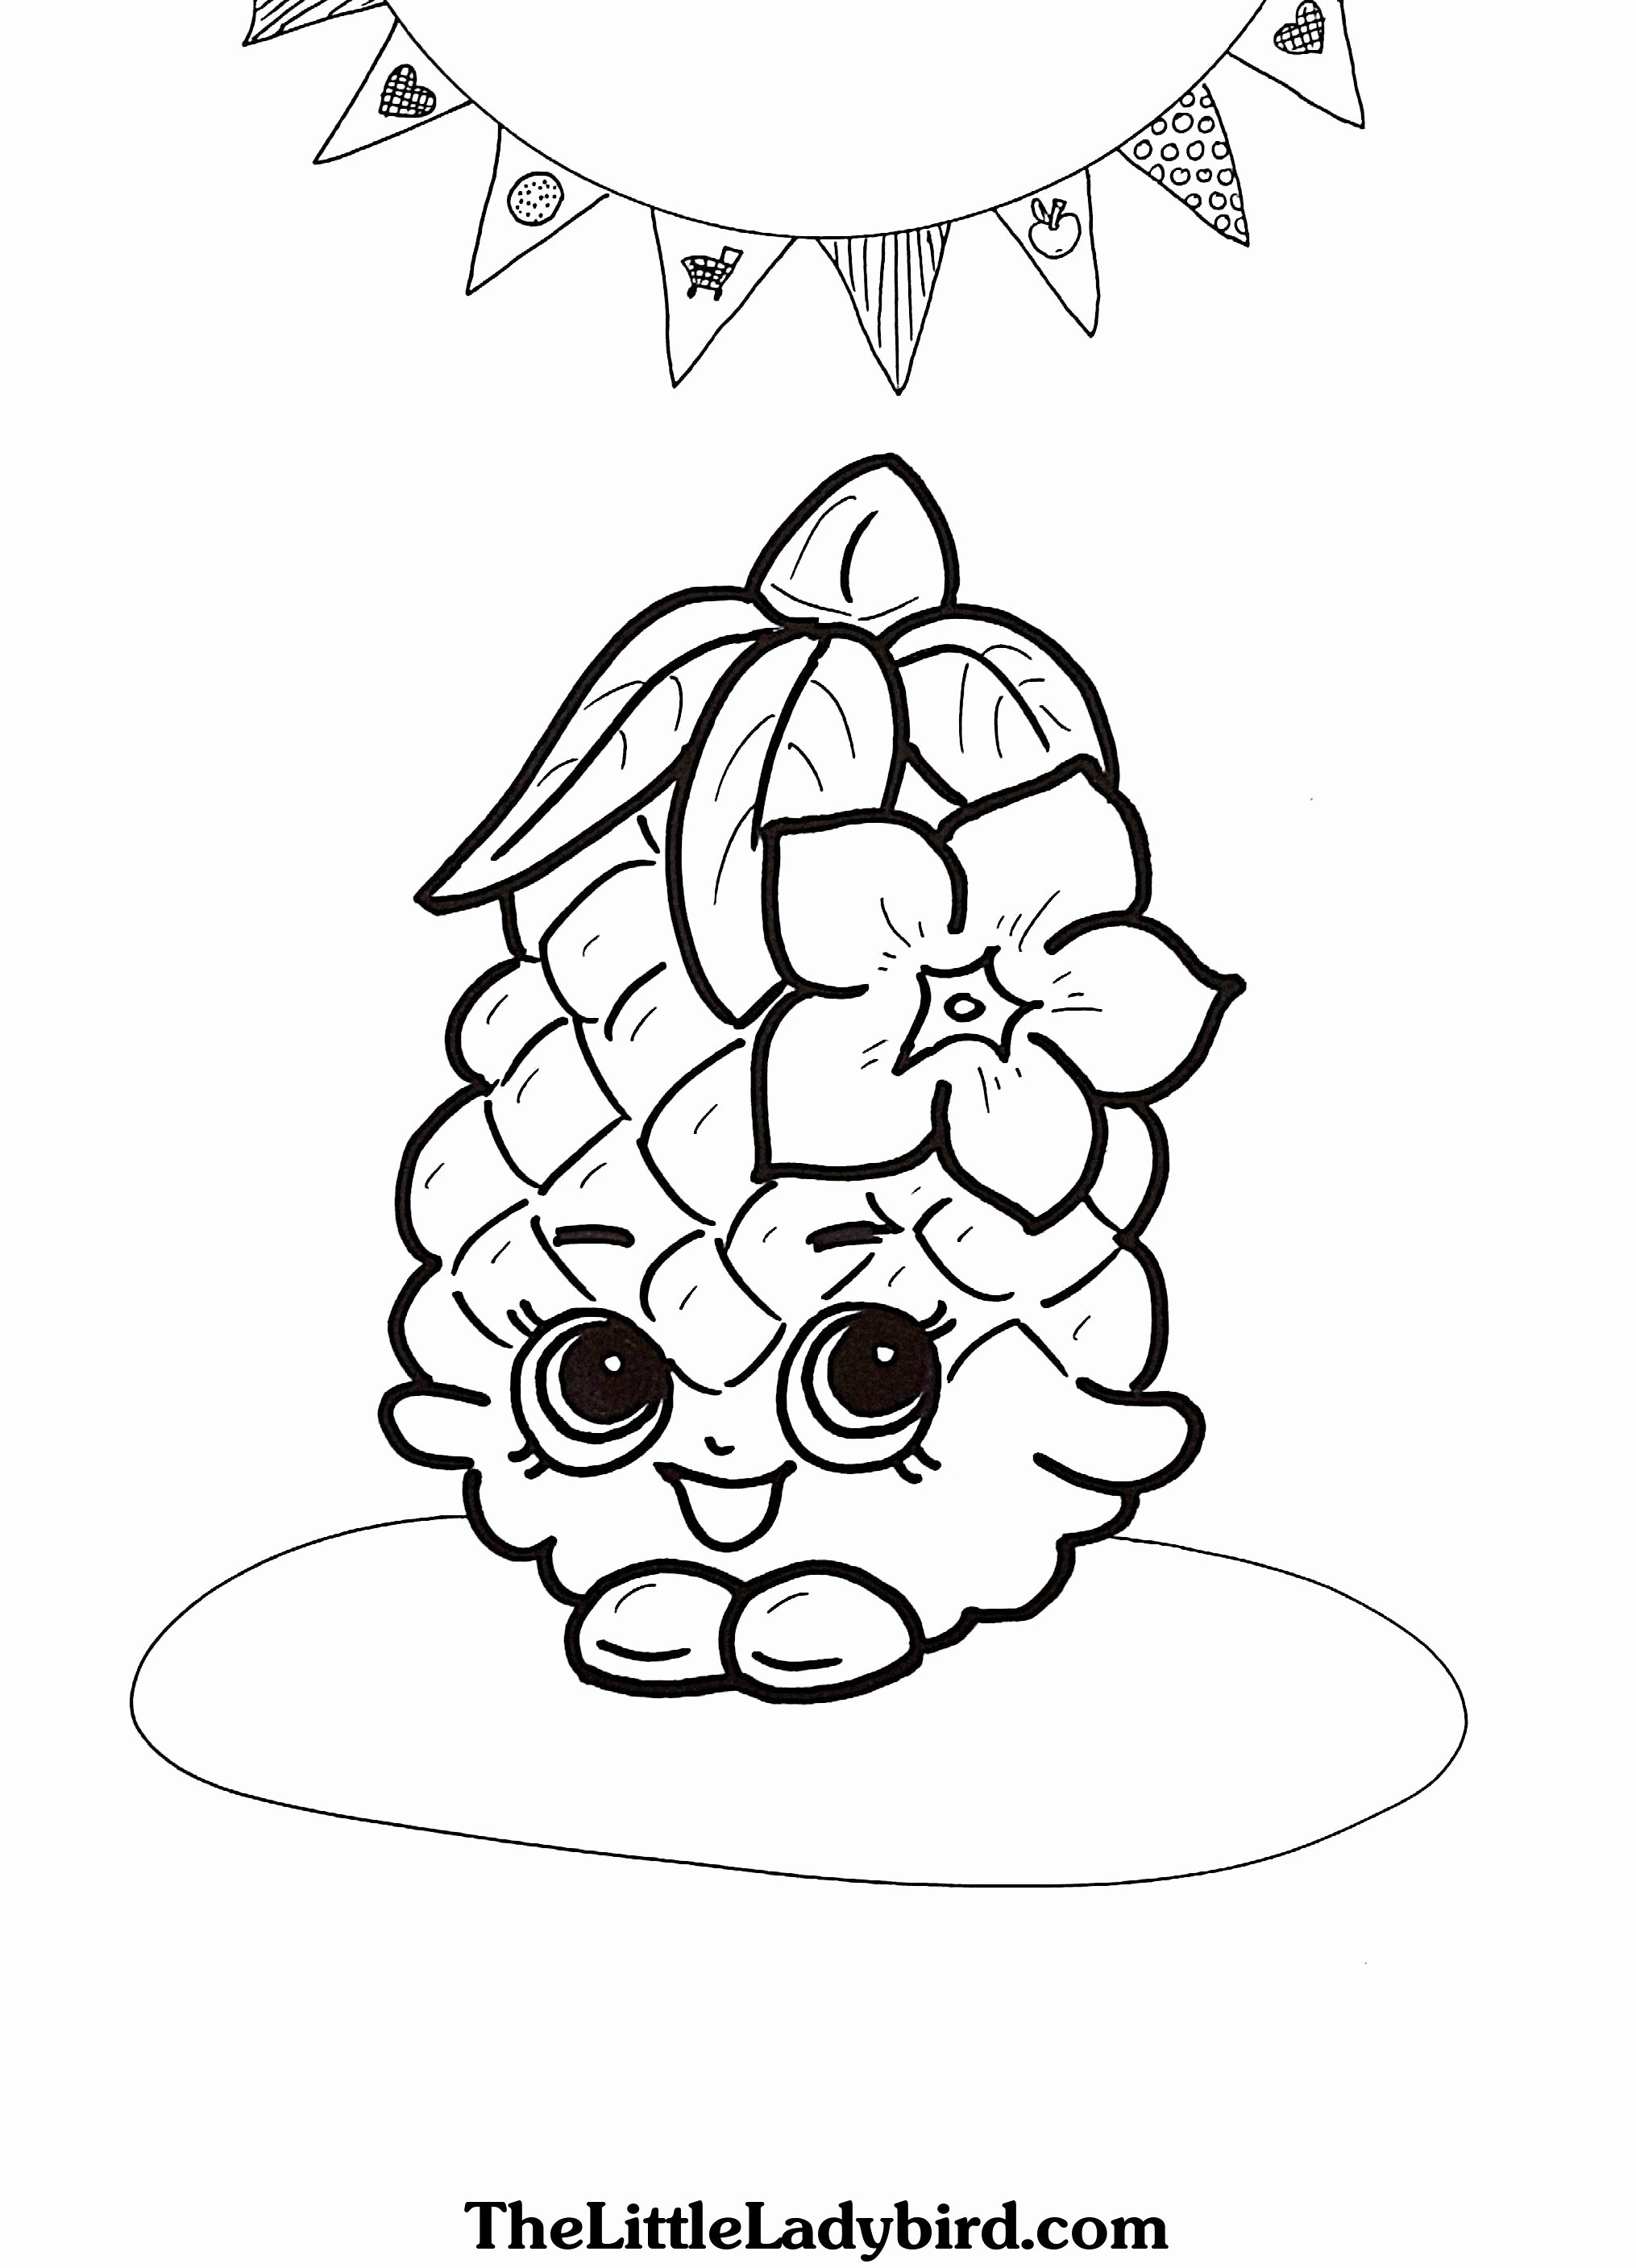 Football Coloring Page Fresh Coloring Pages Printable New Printable Cds 0d Coloring Pages